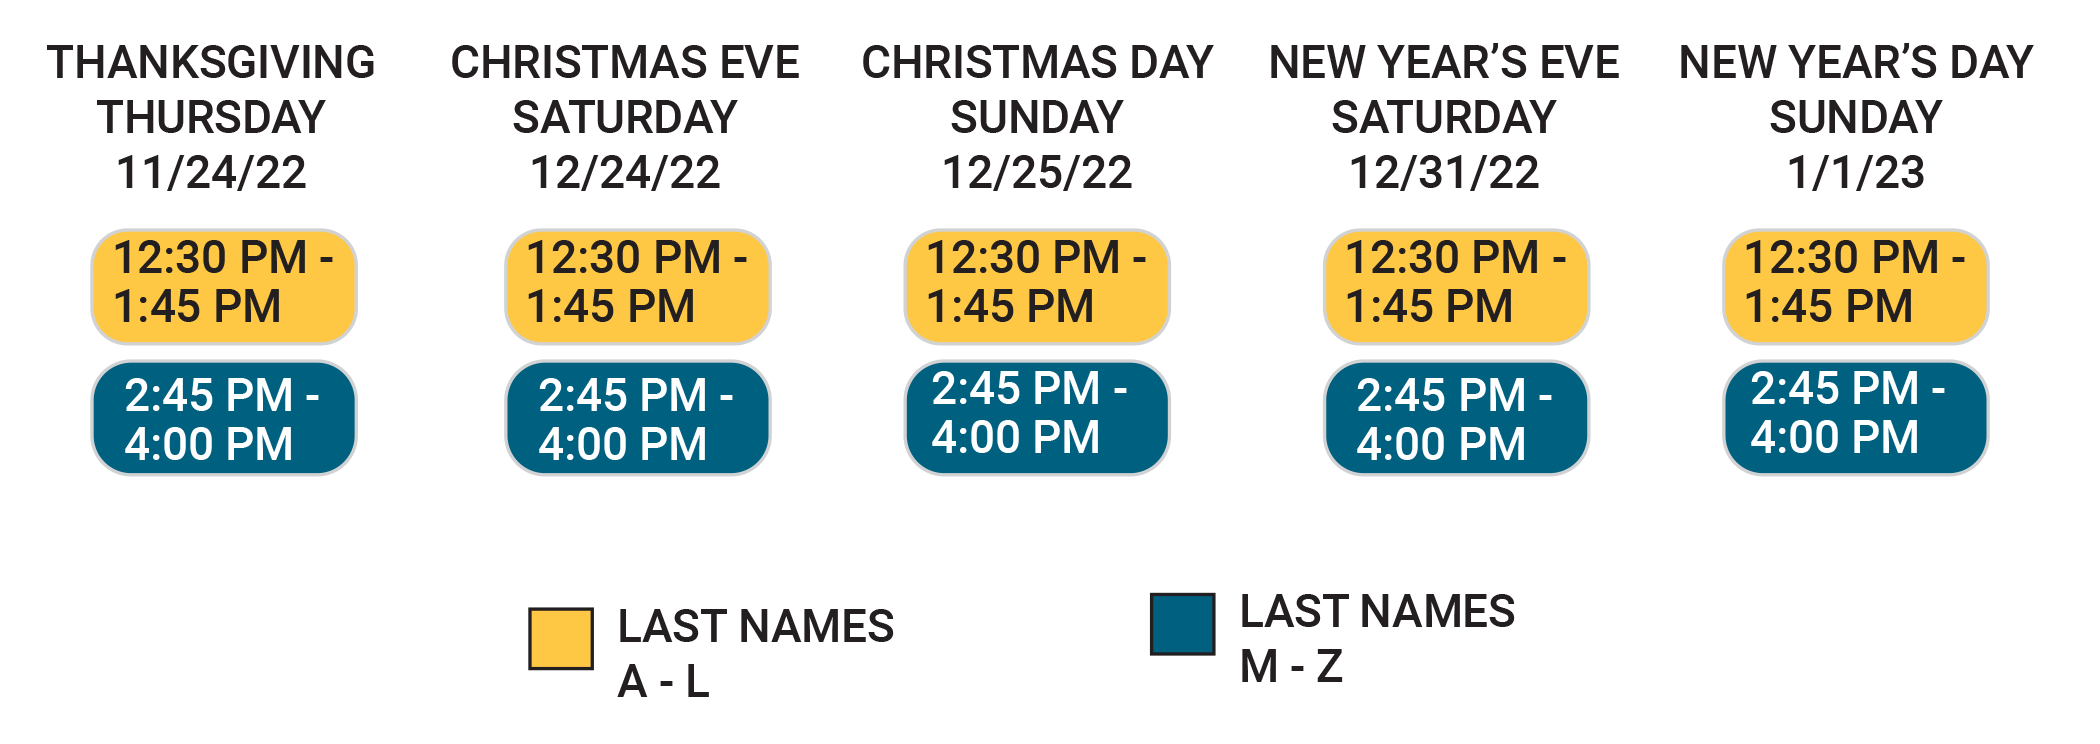 CCCO Schedule Holiday 2022 crop.png